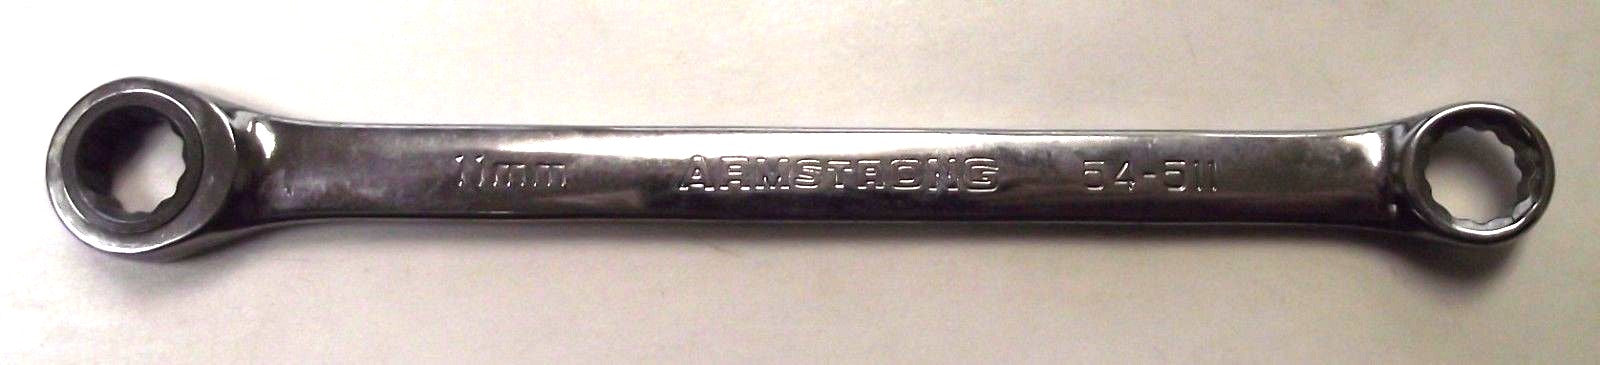 Armstrong 54-511 11mm 12 Point Full Polish Double Box Ratcheting Wrench USA